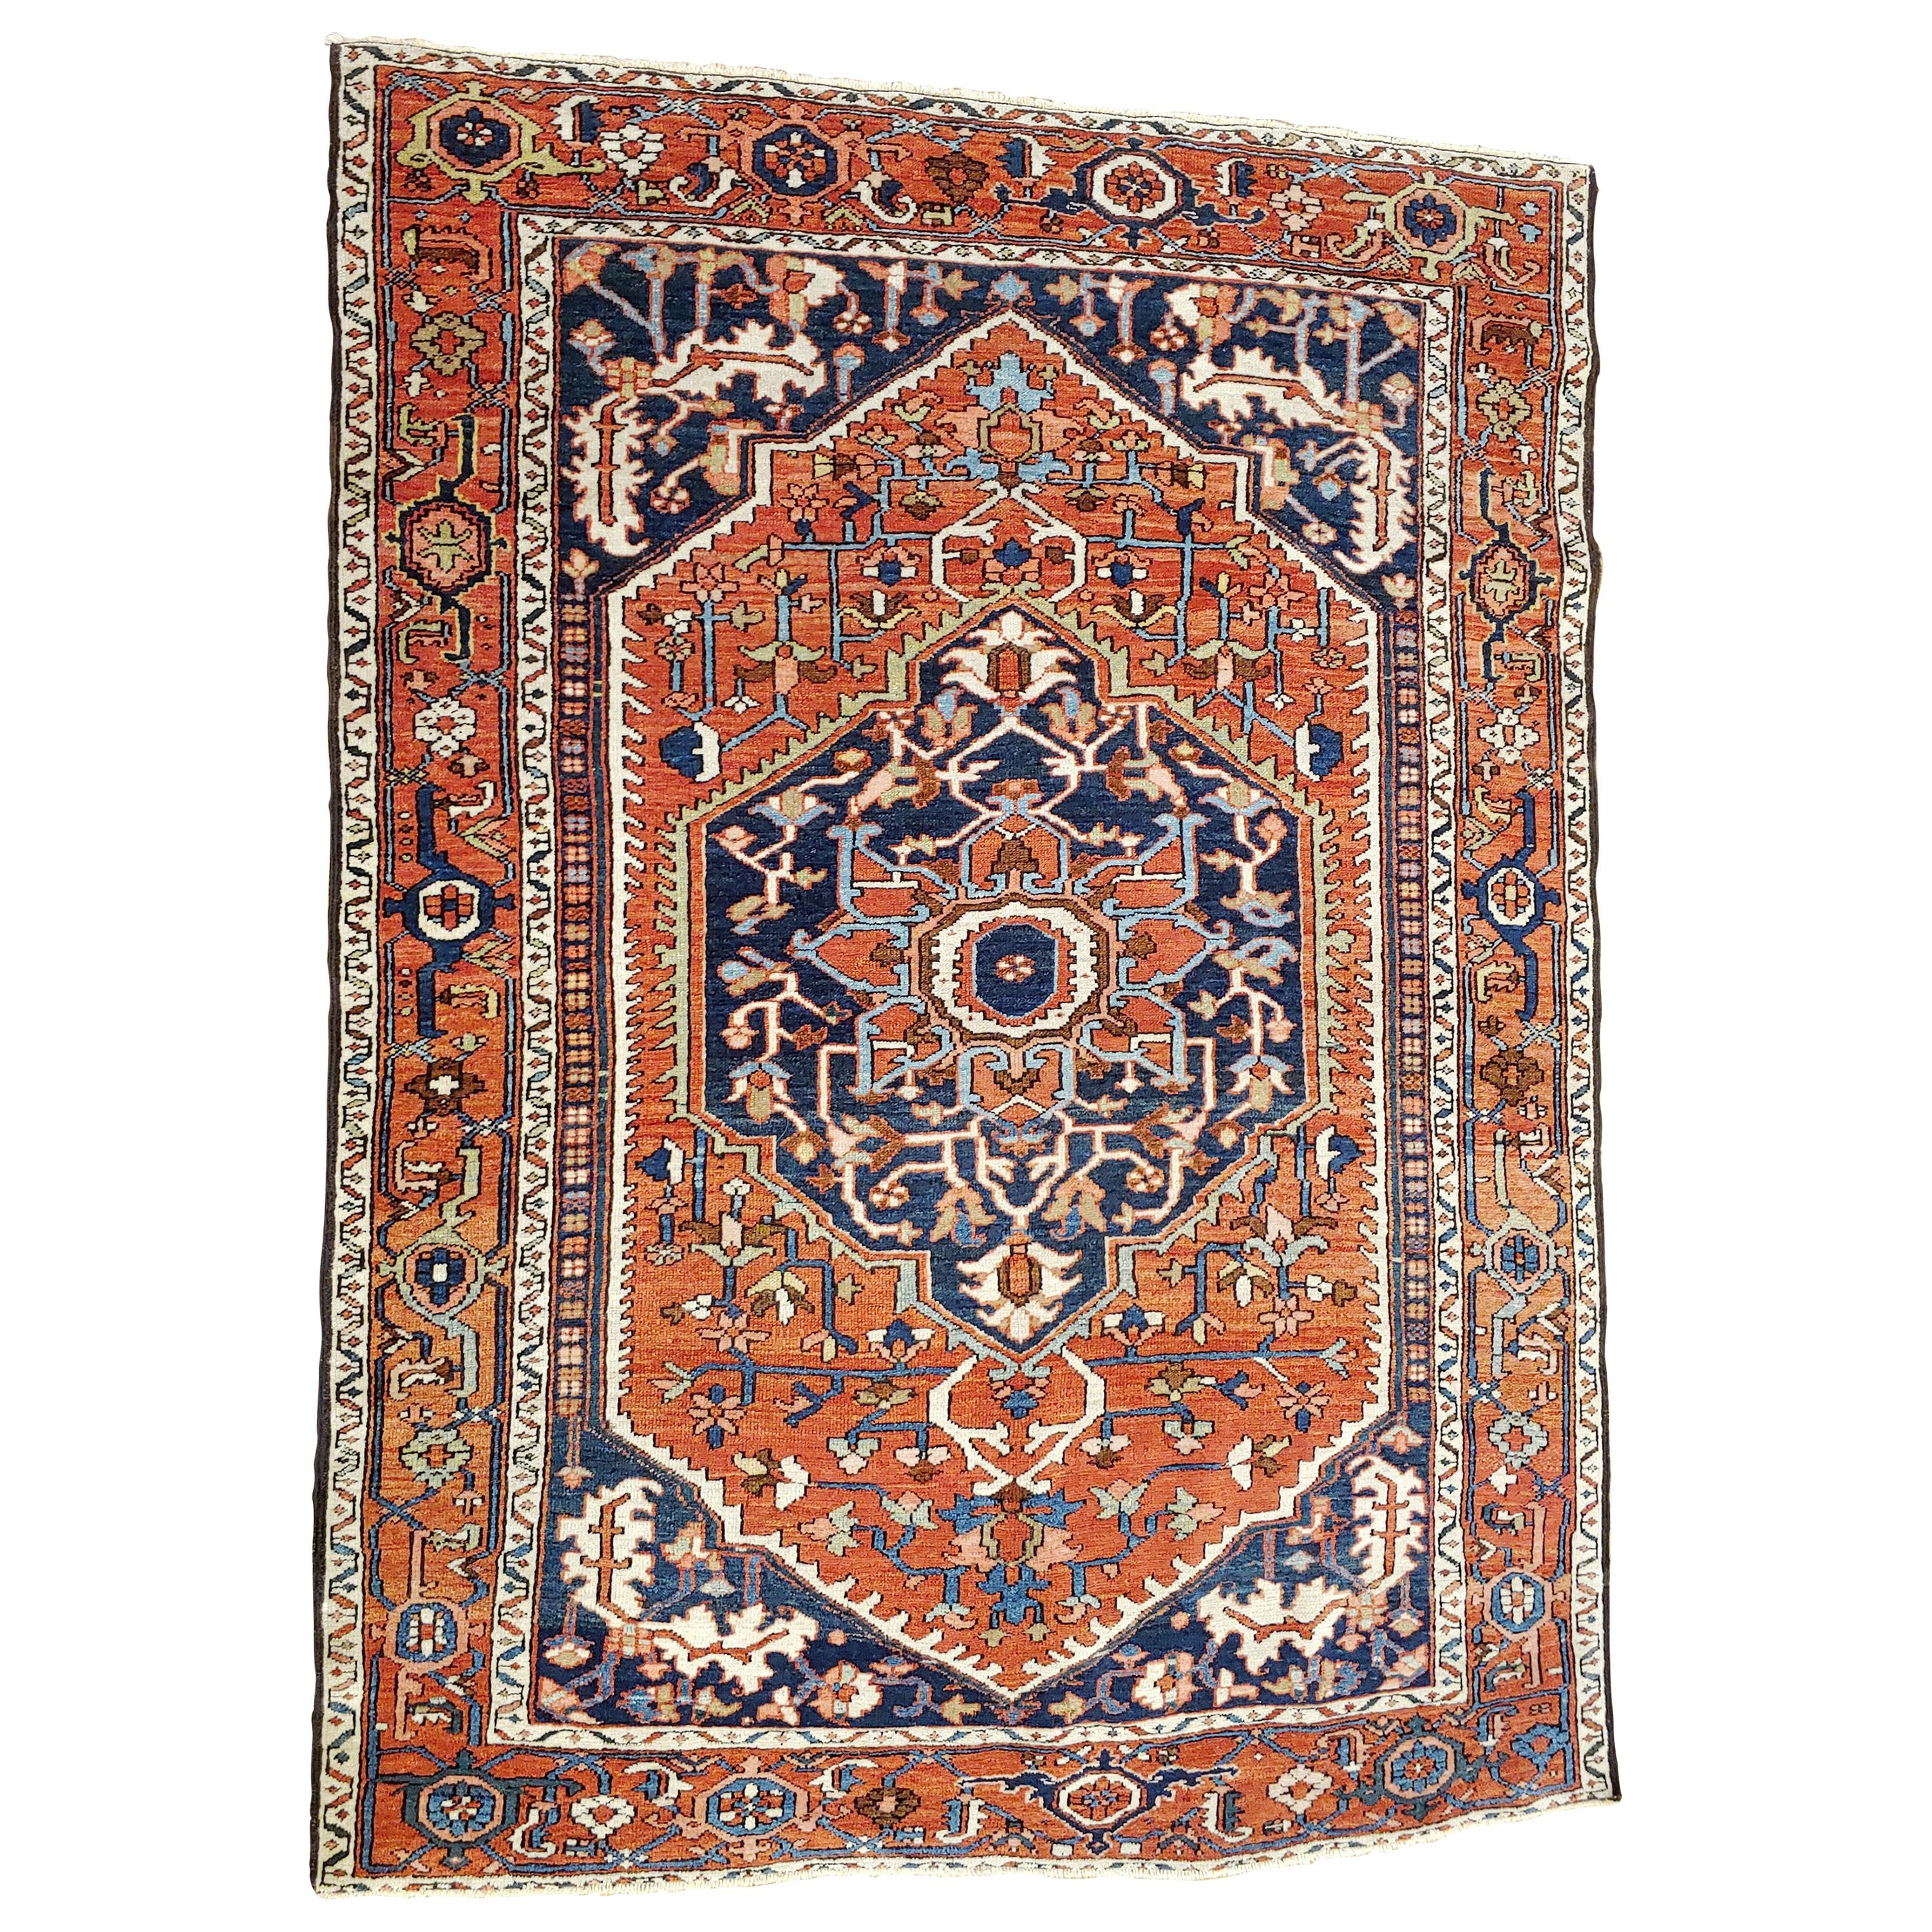 This is a rare scatter size antique Persian Serapi. These rugs also known as an antique Heriz, because they were woven in the city of Heriz before the transition to busier patterns and brighter colors. This rug has a very stately design with a